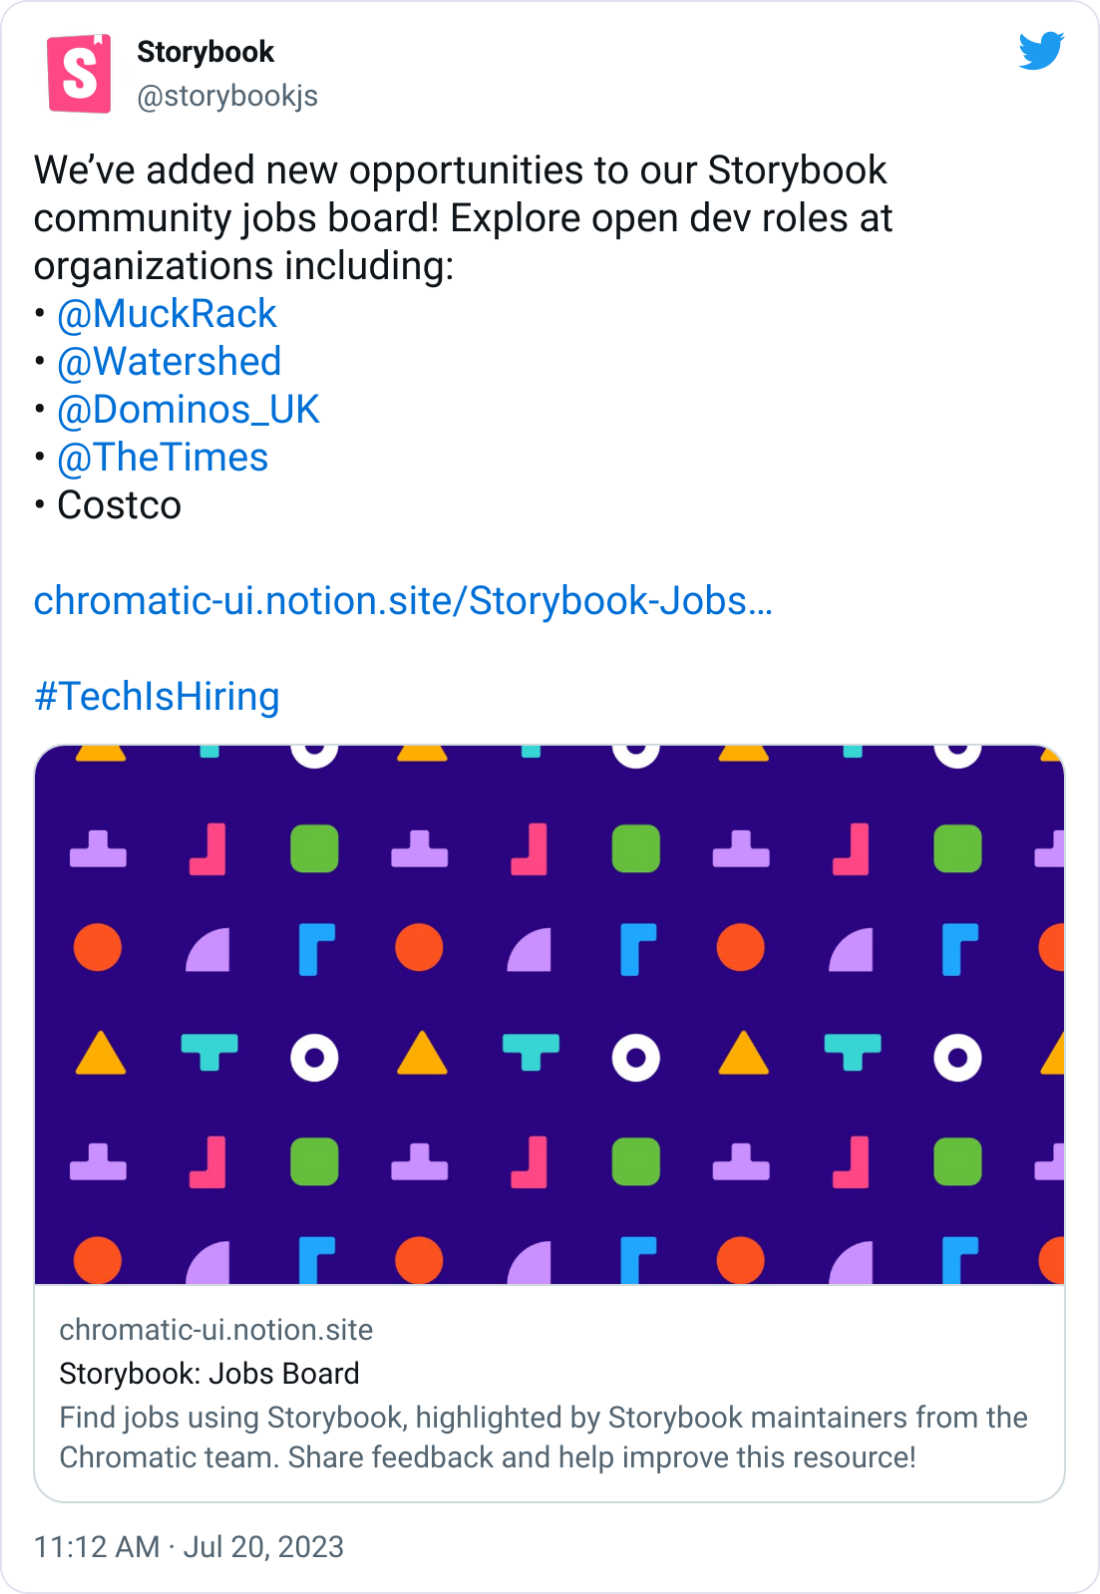 Storybook @storybookjs We’ve added new opportunities to our Storybook community jobs board! Explore open dev roles at organizations including: •  @MuckRack   •  @Watershed   •  @Dominos_UK   •  @TheTimes   • Costco  https://chromatic-ui.notion.site/Storybook-Jobs-Board-950e001e4a114a39980a5b09c3a3b3e1?pvs=4  #TechIsHiring